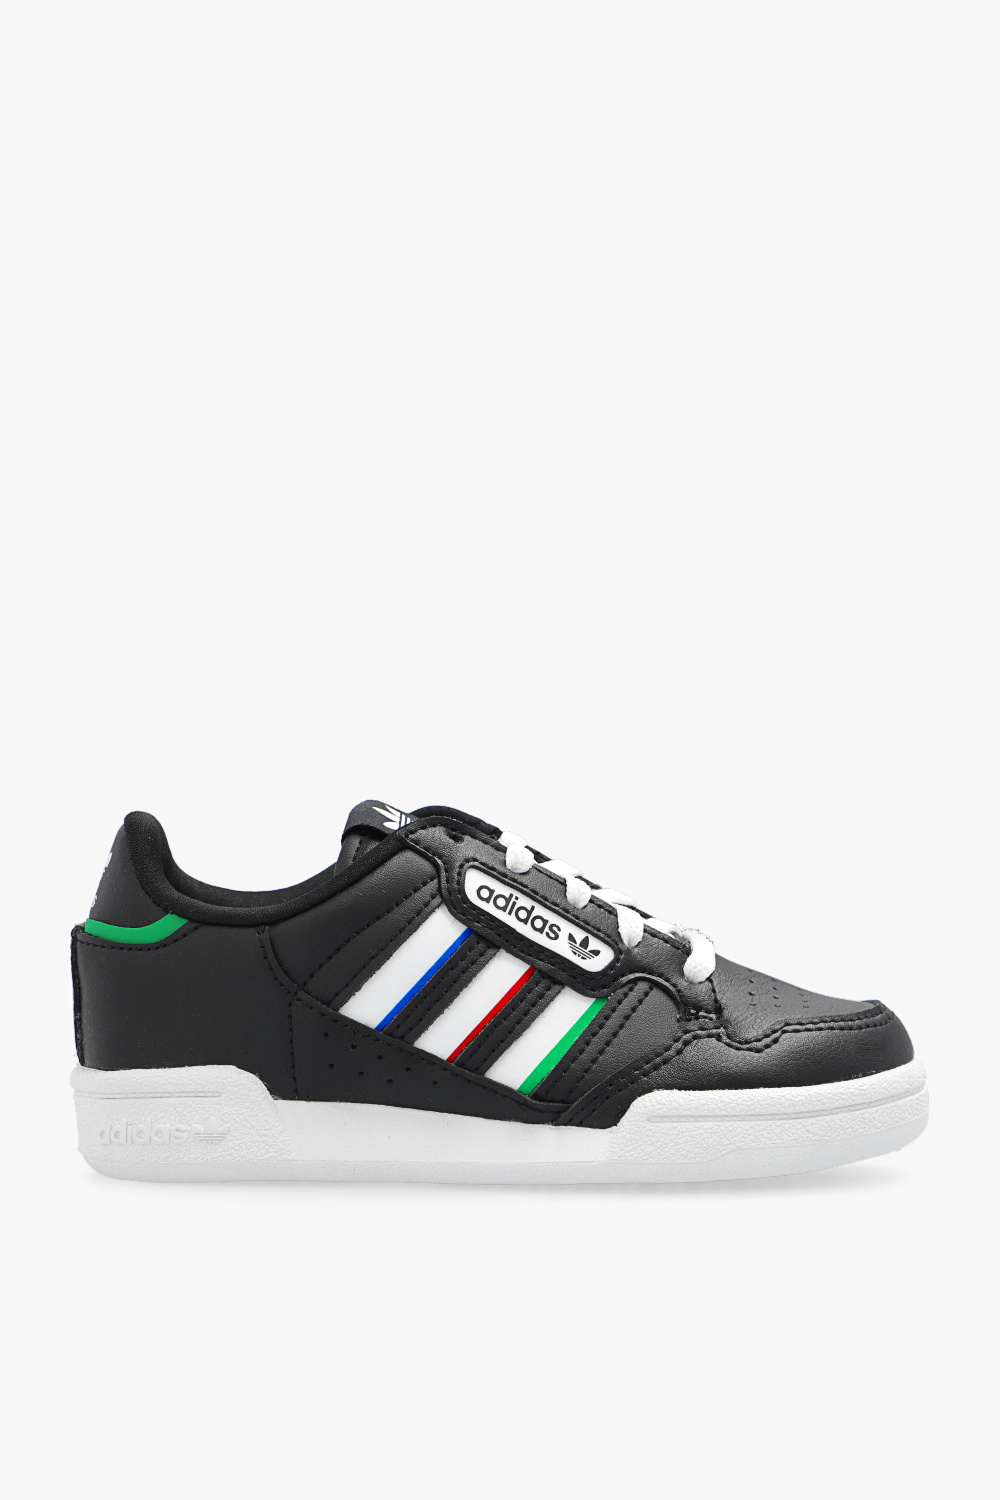 ADIDAS Kids ‘Continental 80 Stripes C’ sneakers